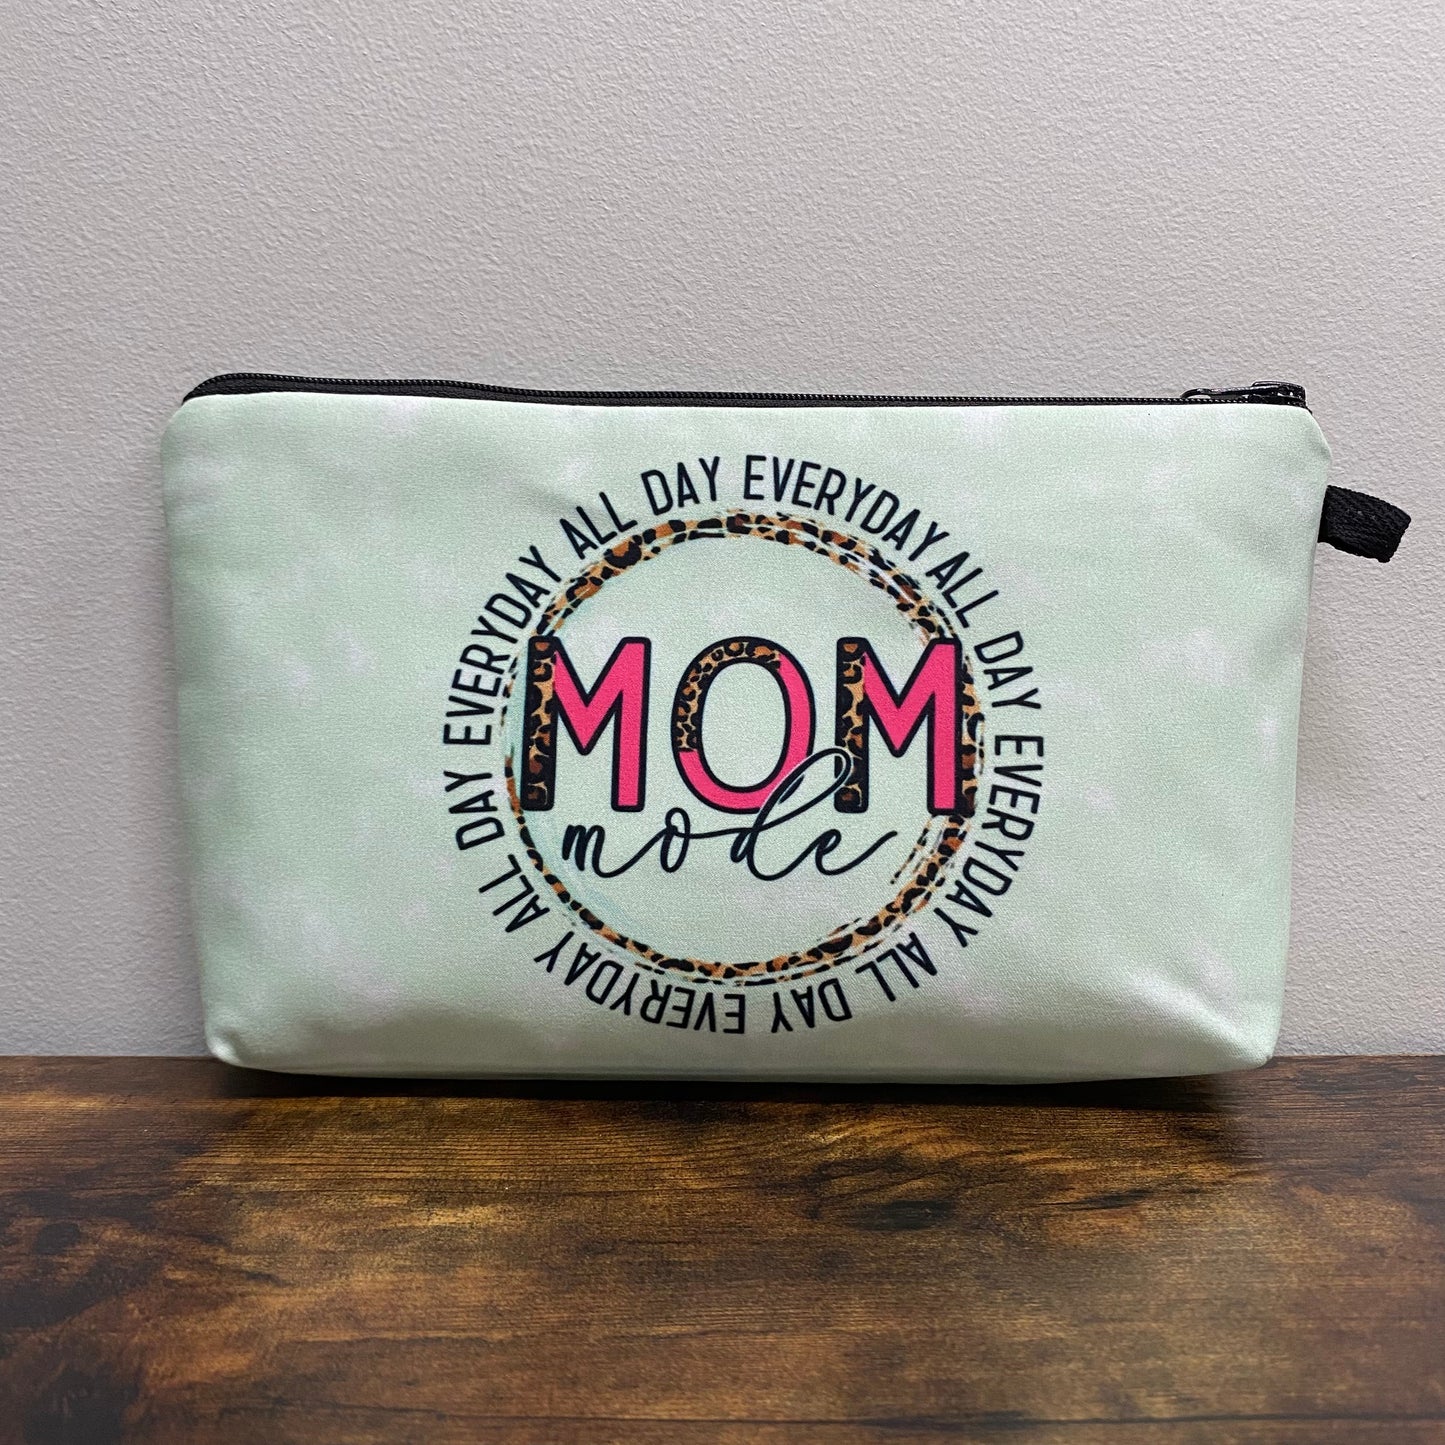 Pouch - Mom Mode